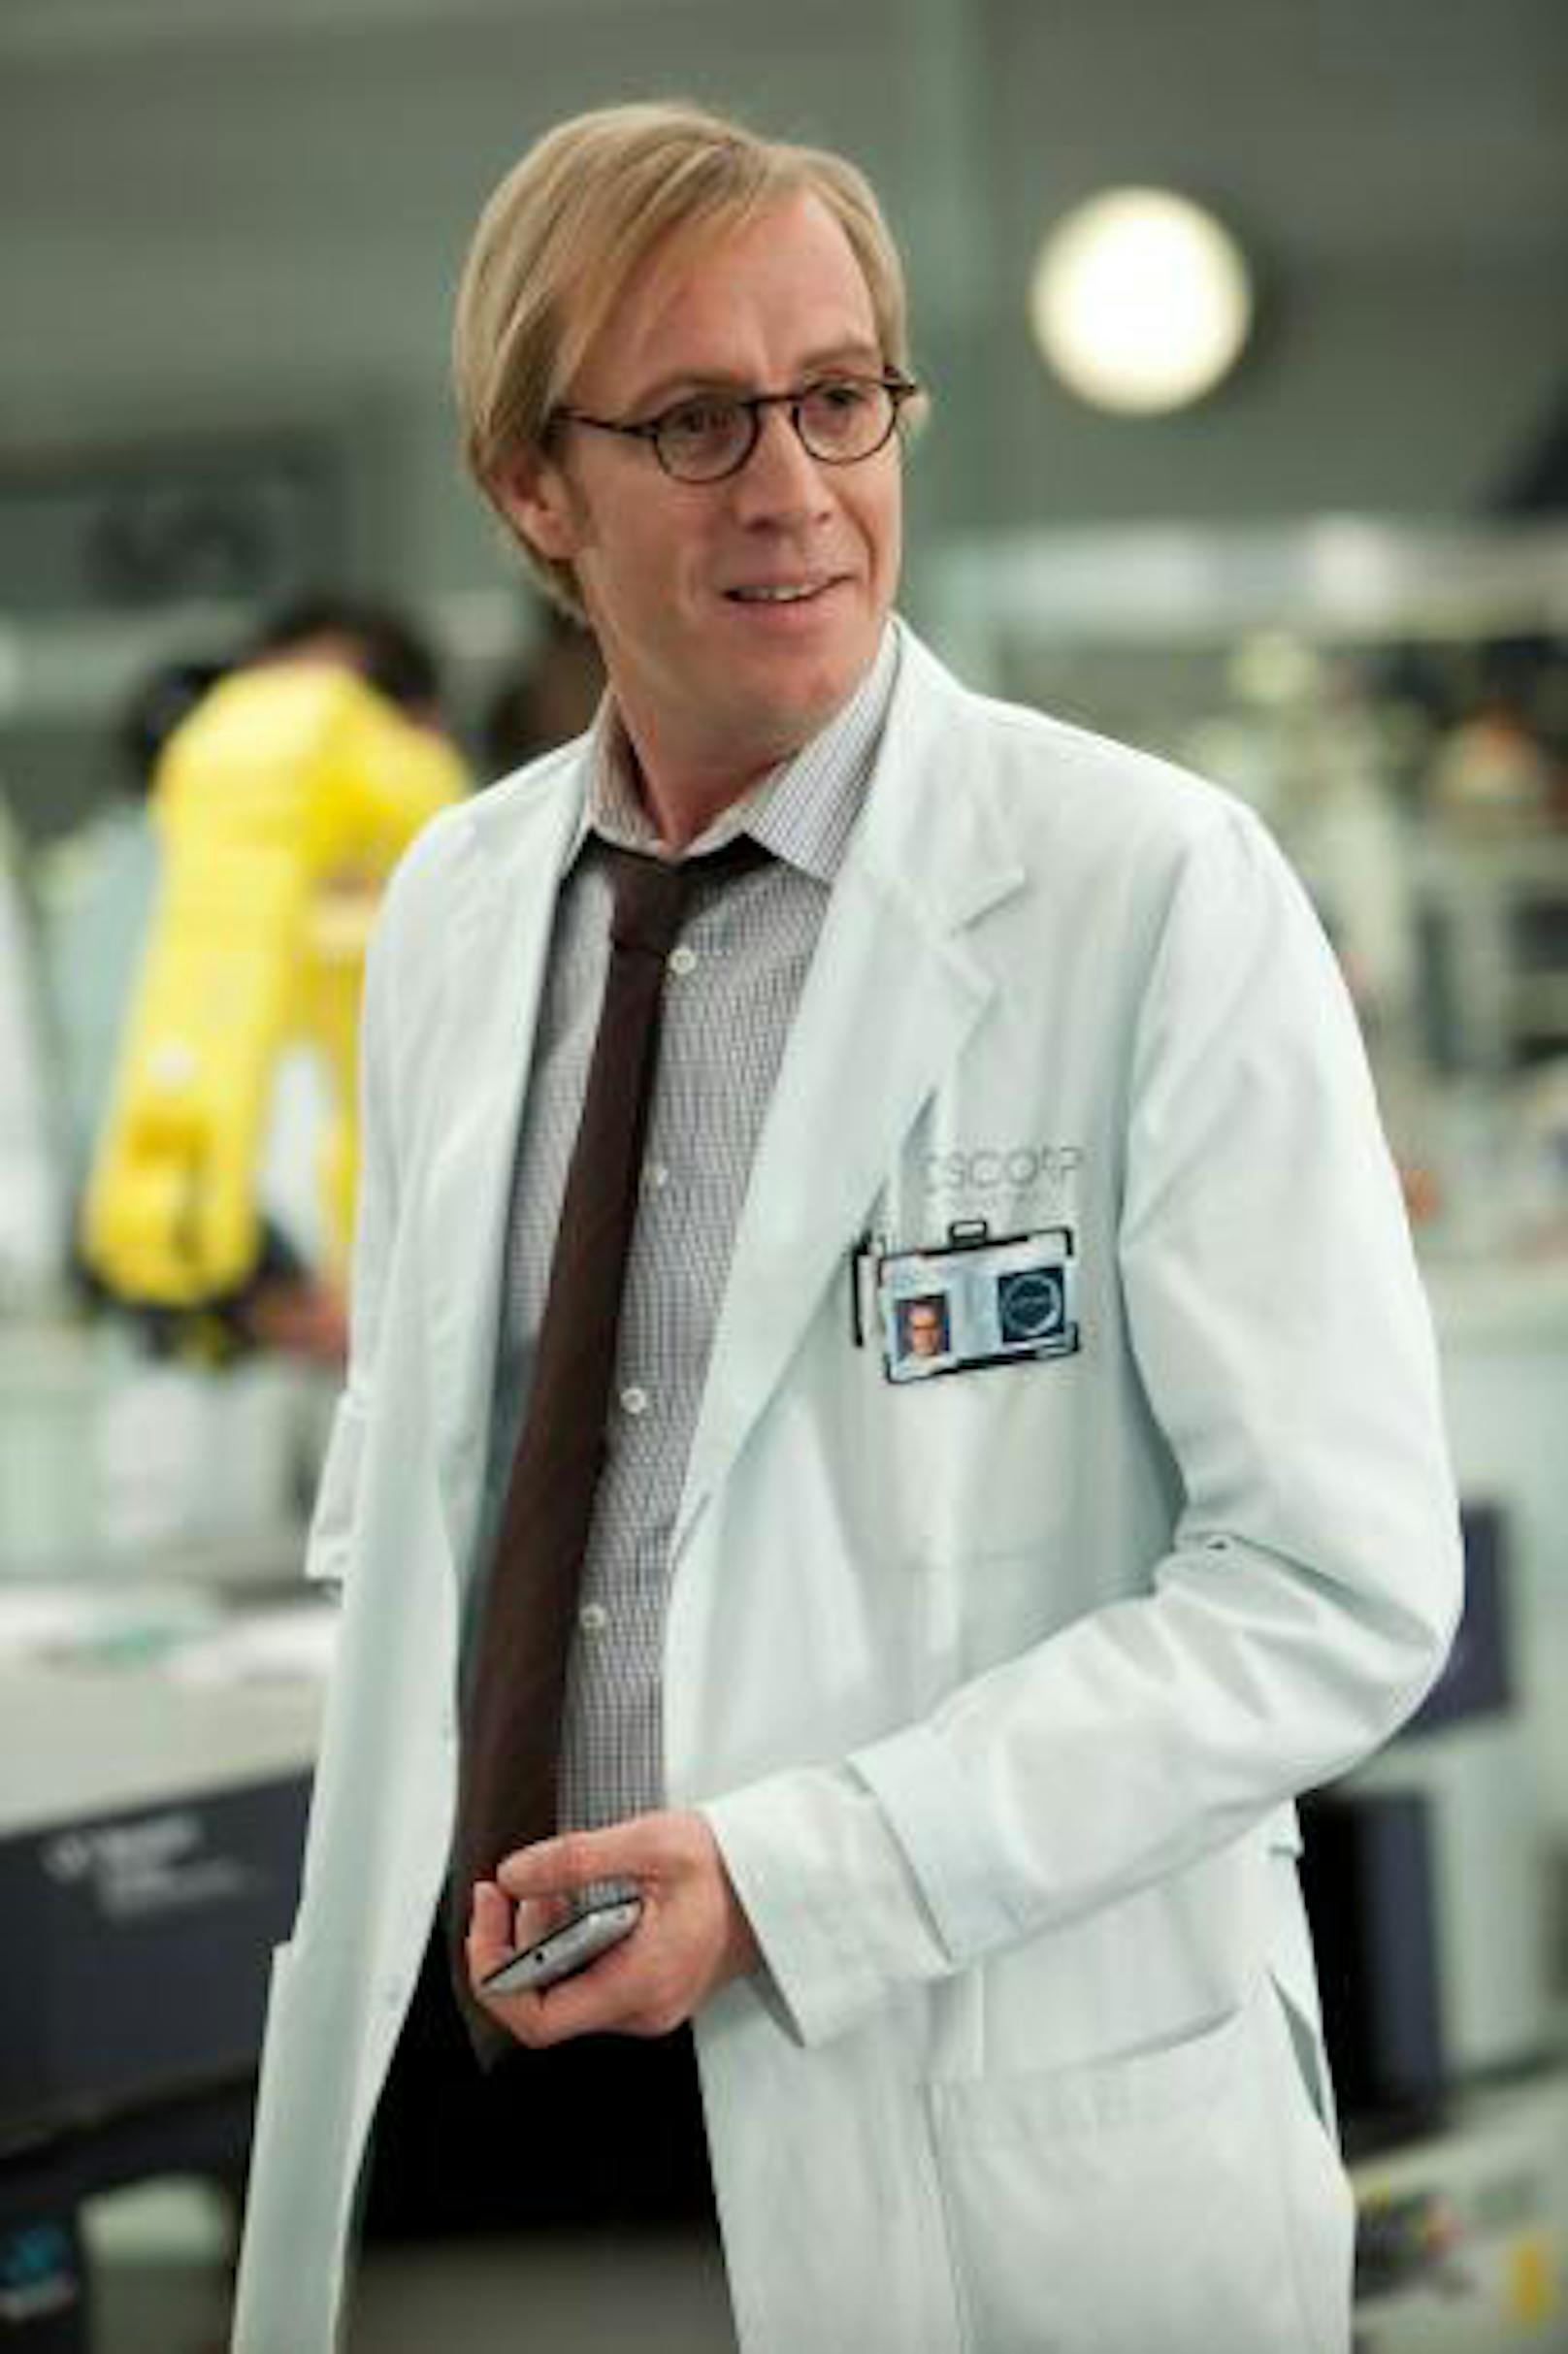 Rhys Ifans in "The Amazing Spider-Man"